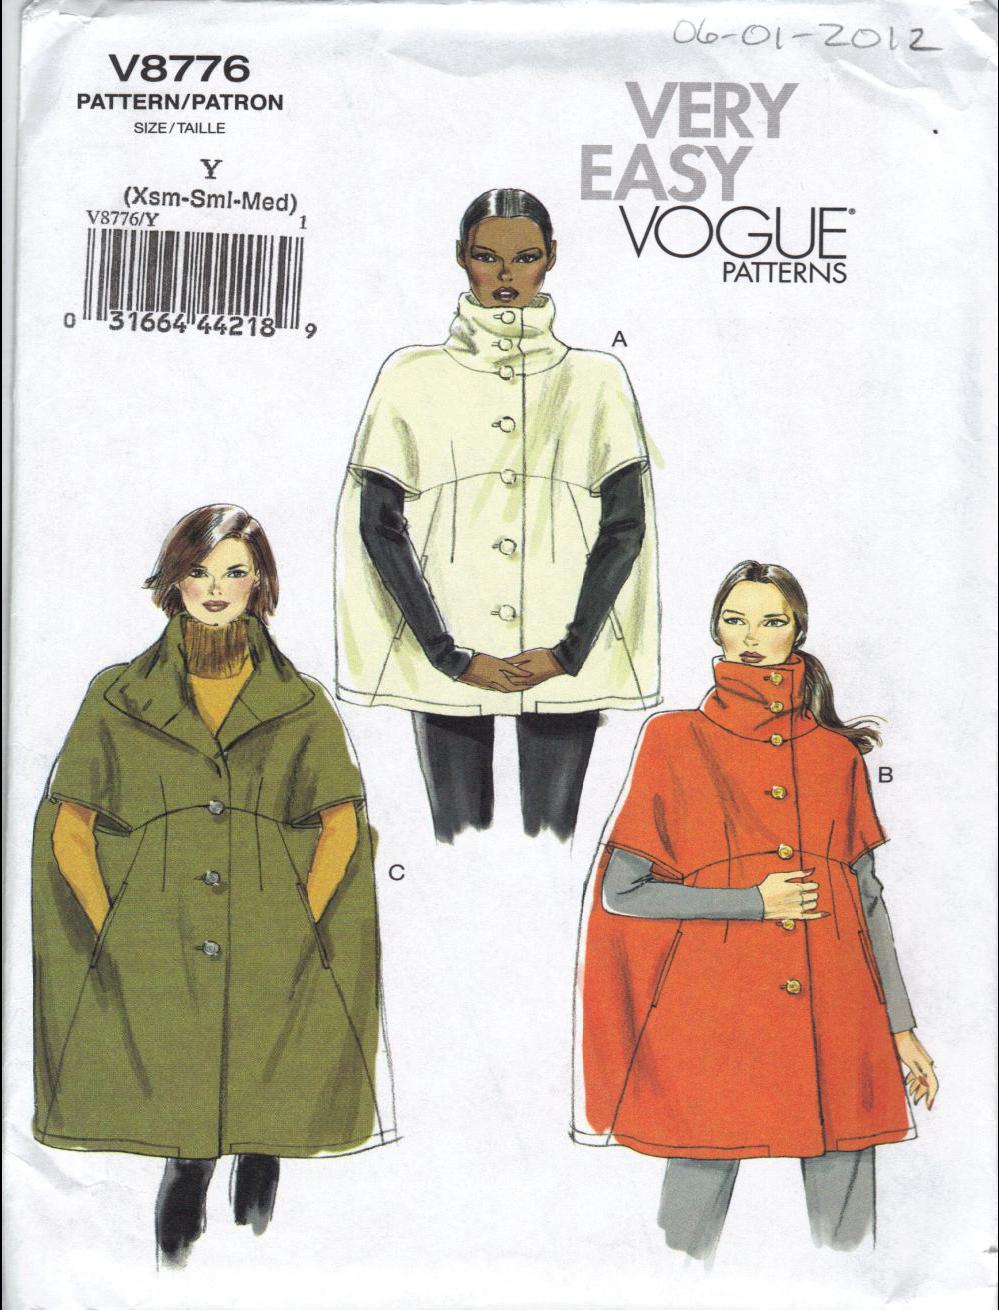 Sew Couture...: JoAnn Pattern Sale - Vogue and McCall's